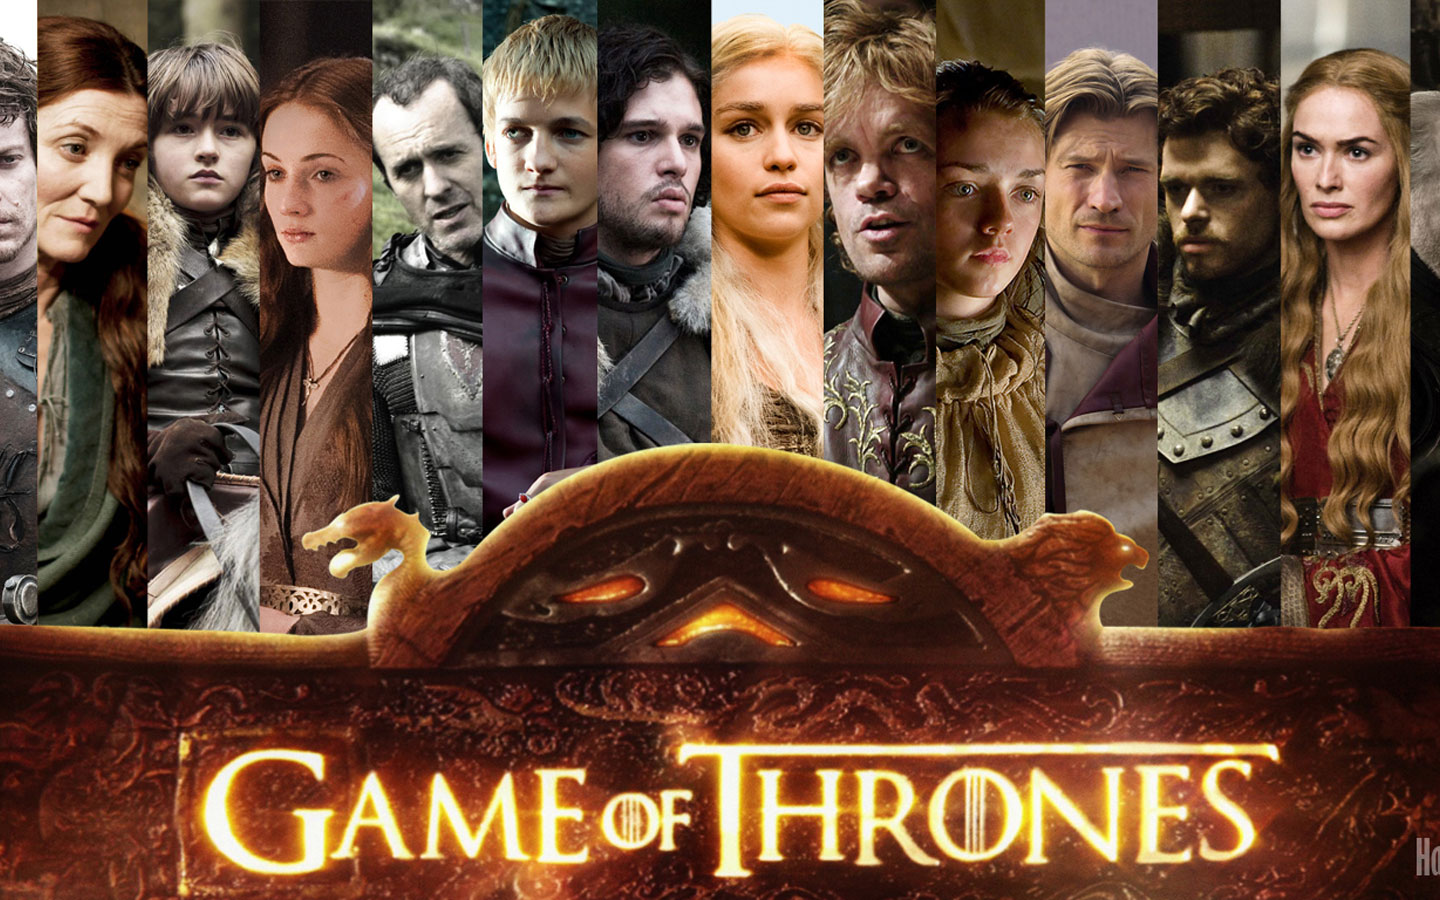 Game Of Thrones Season 5, Episode 4 Ends With A Bang | Crooks and.